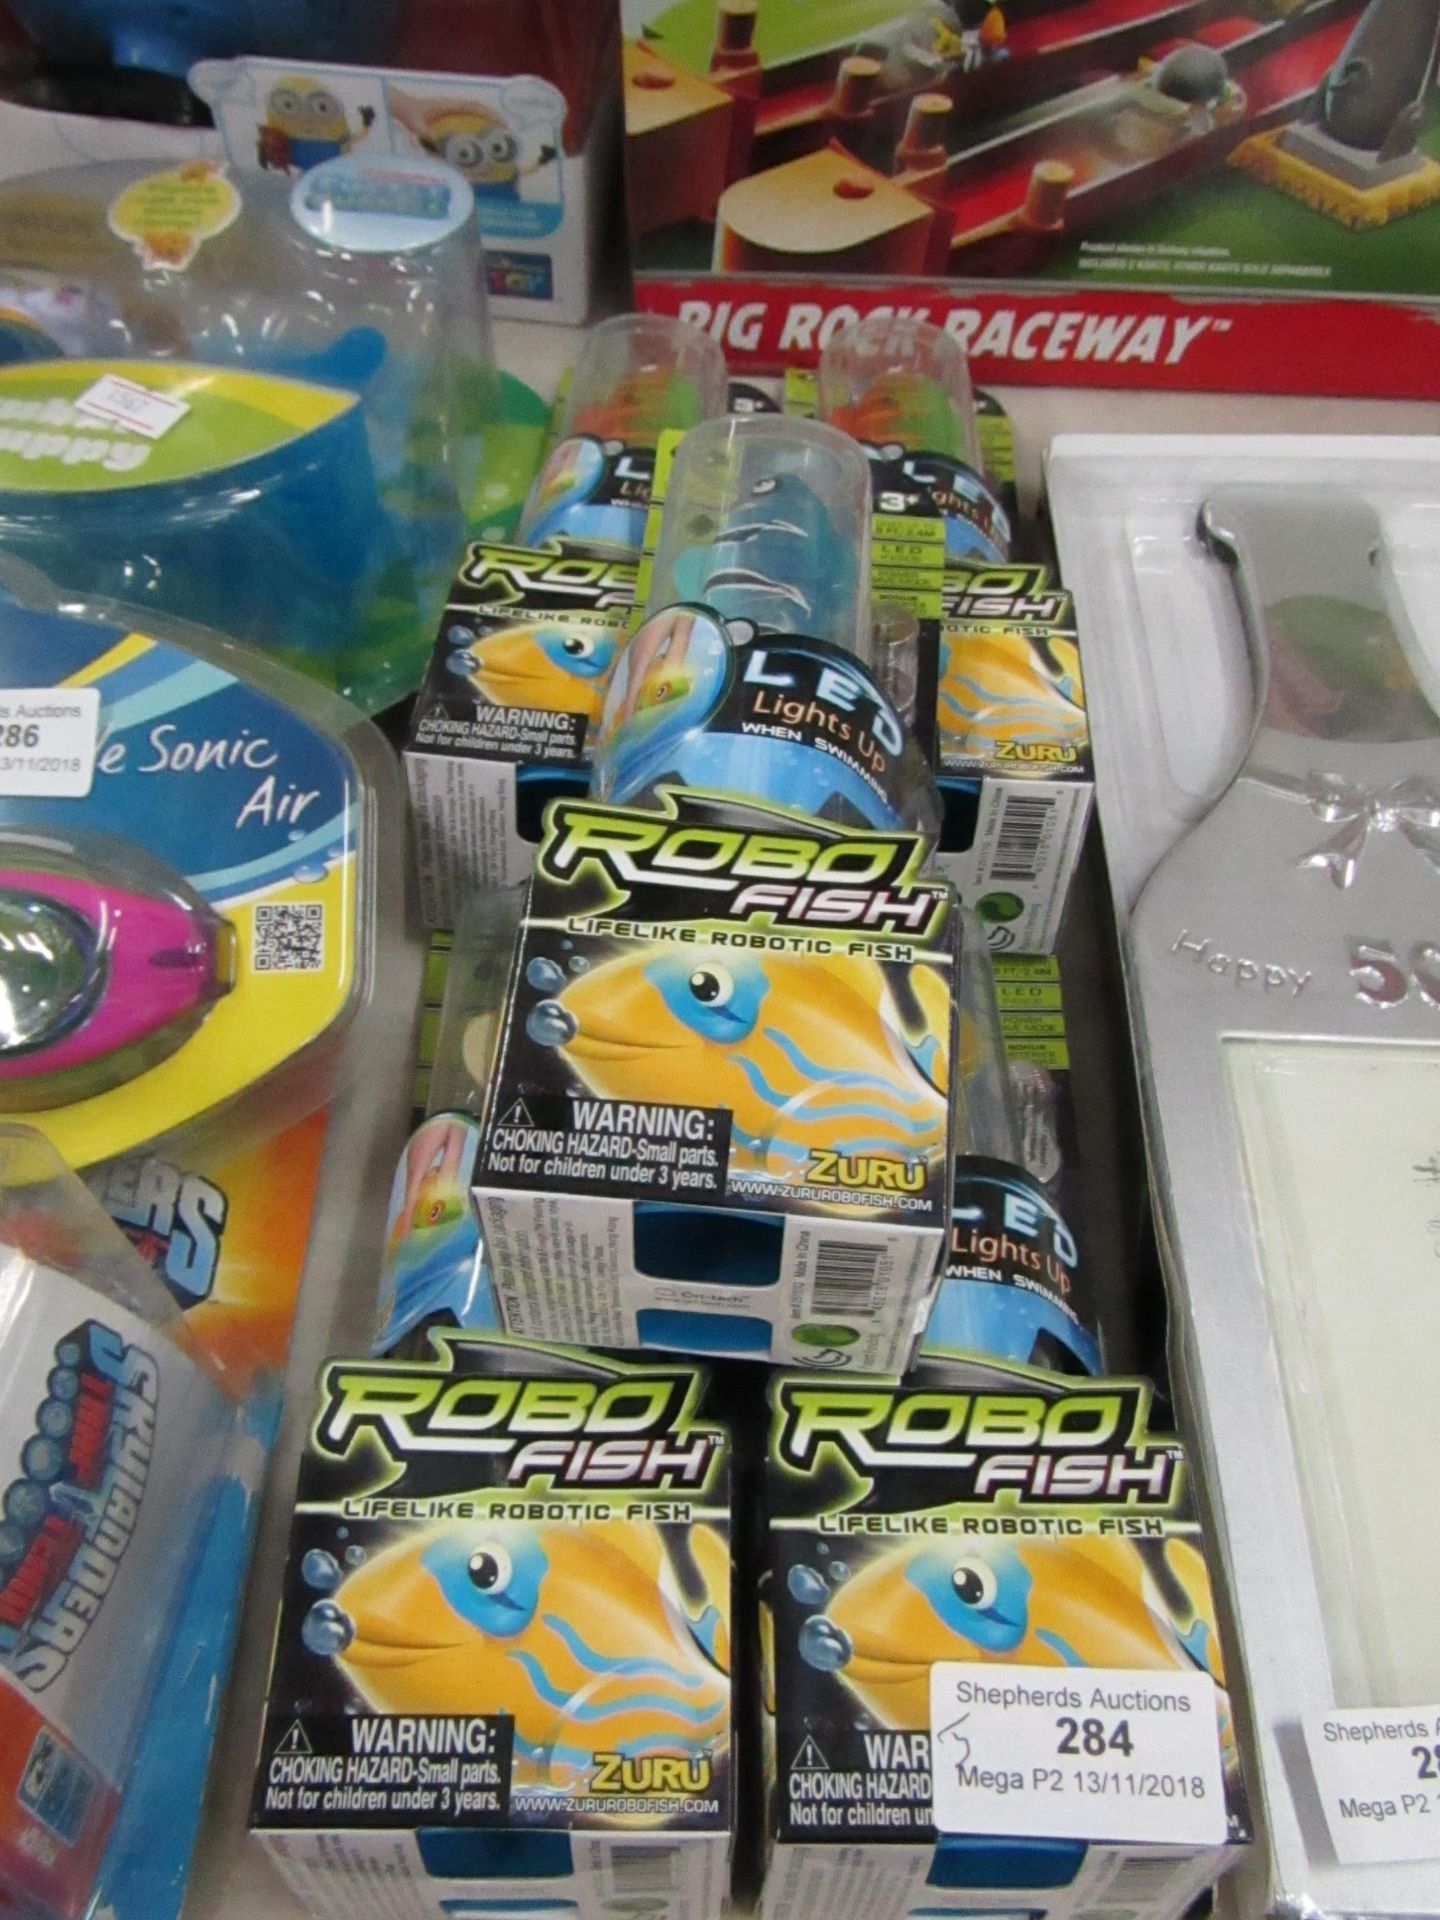 5x Robo fish LED fish. All new in packaging.